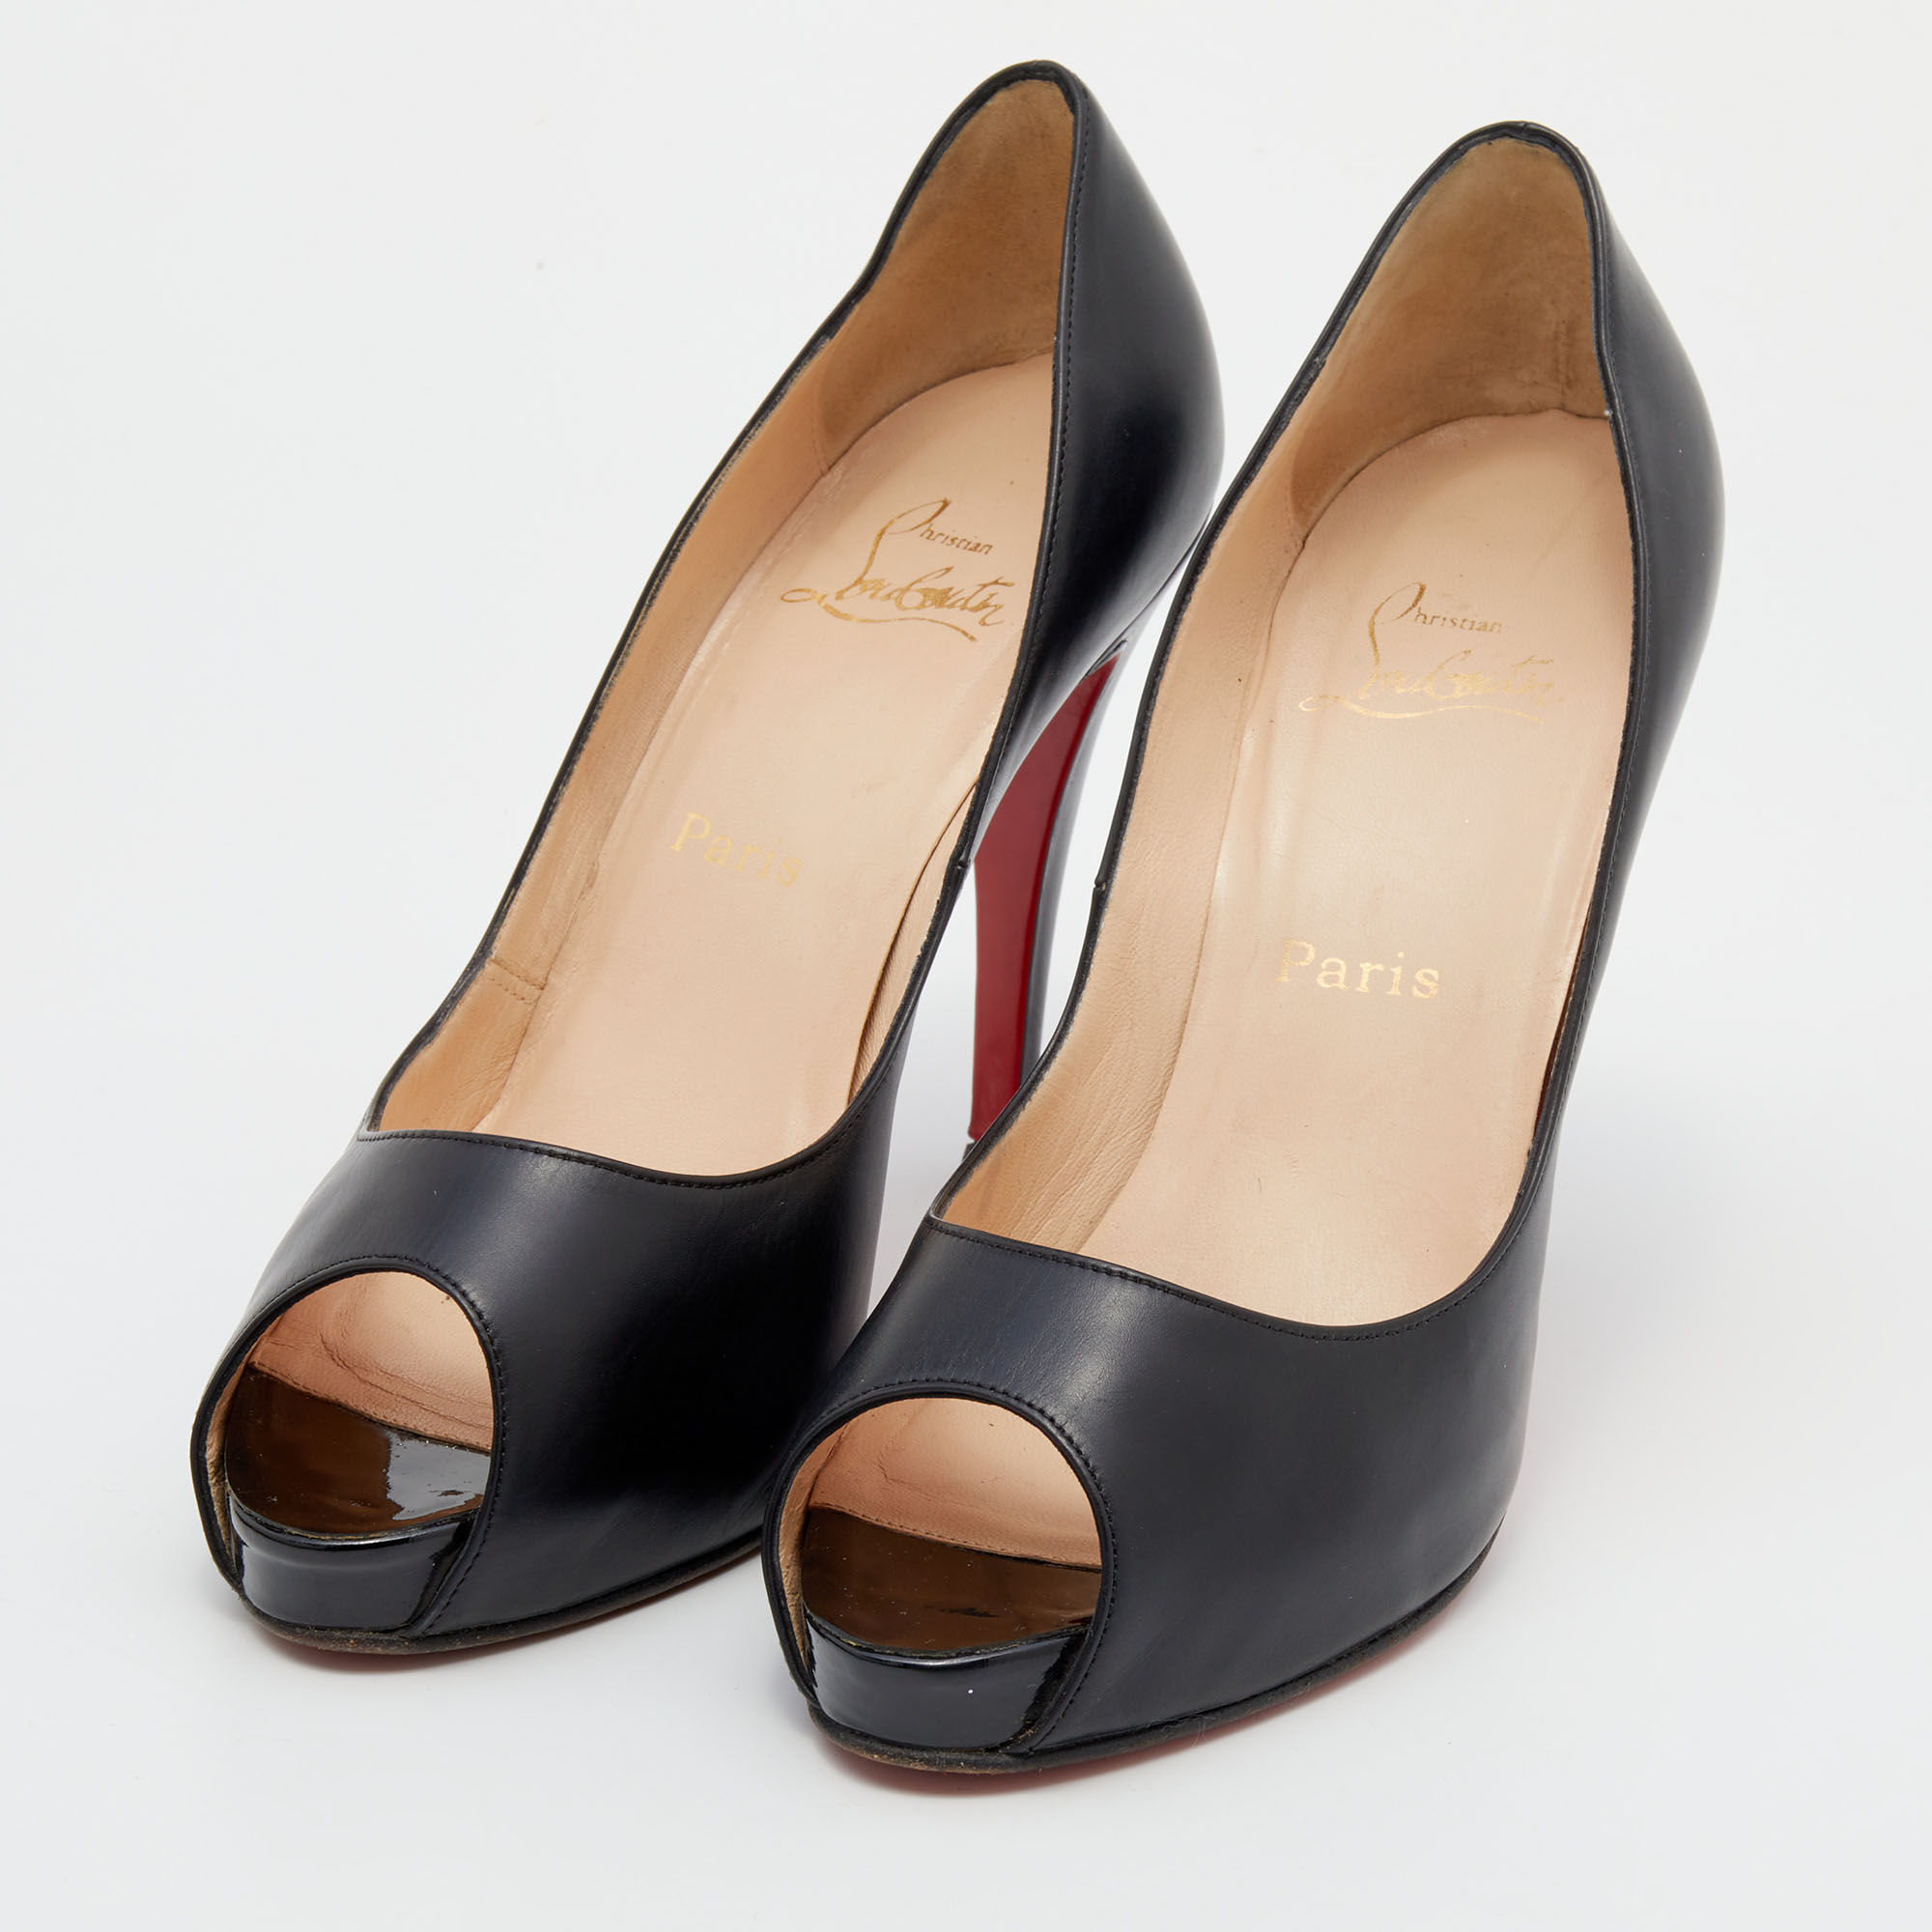 

Christian Louboutin Black Leather New Very Prive Peep Toe Pumps Size